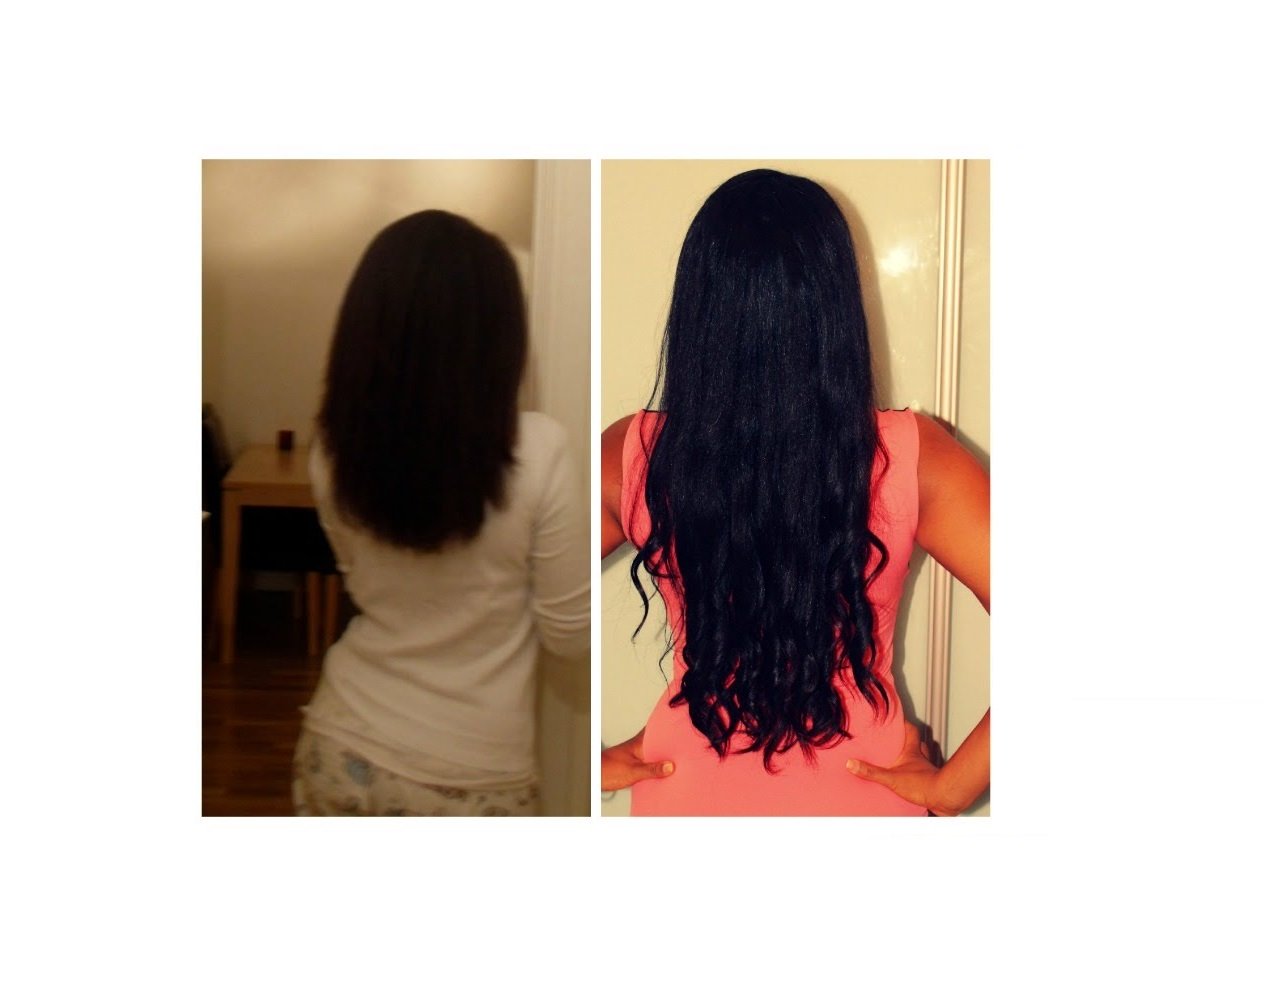 msm-natural-hair-growth-results-before-and-after-pictures topical growth oil and biotin